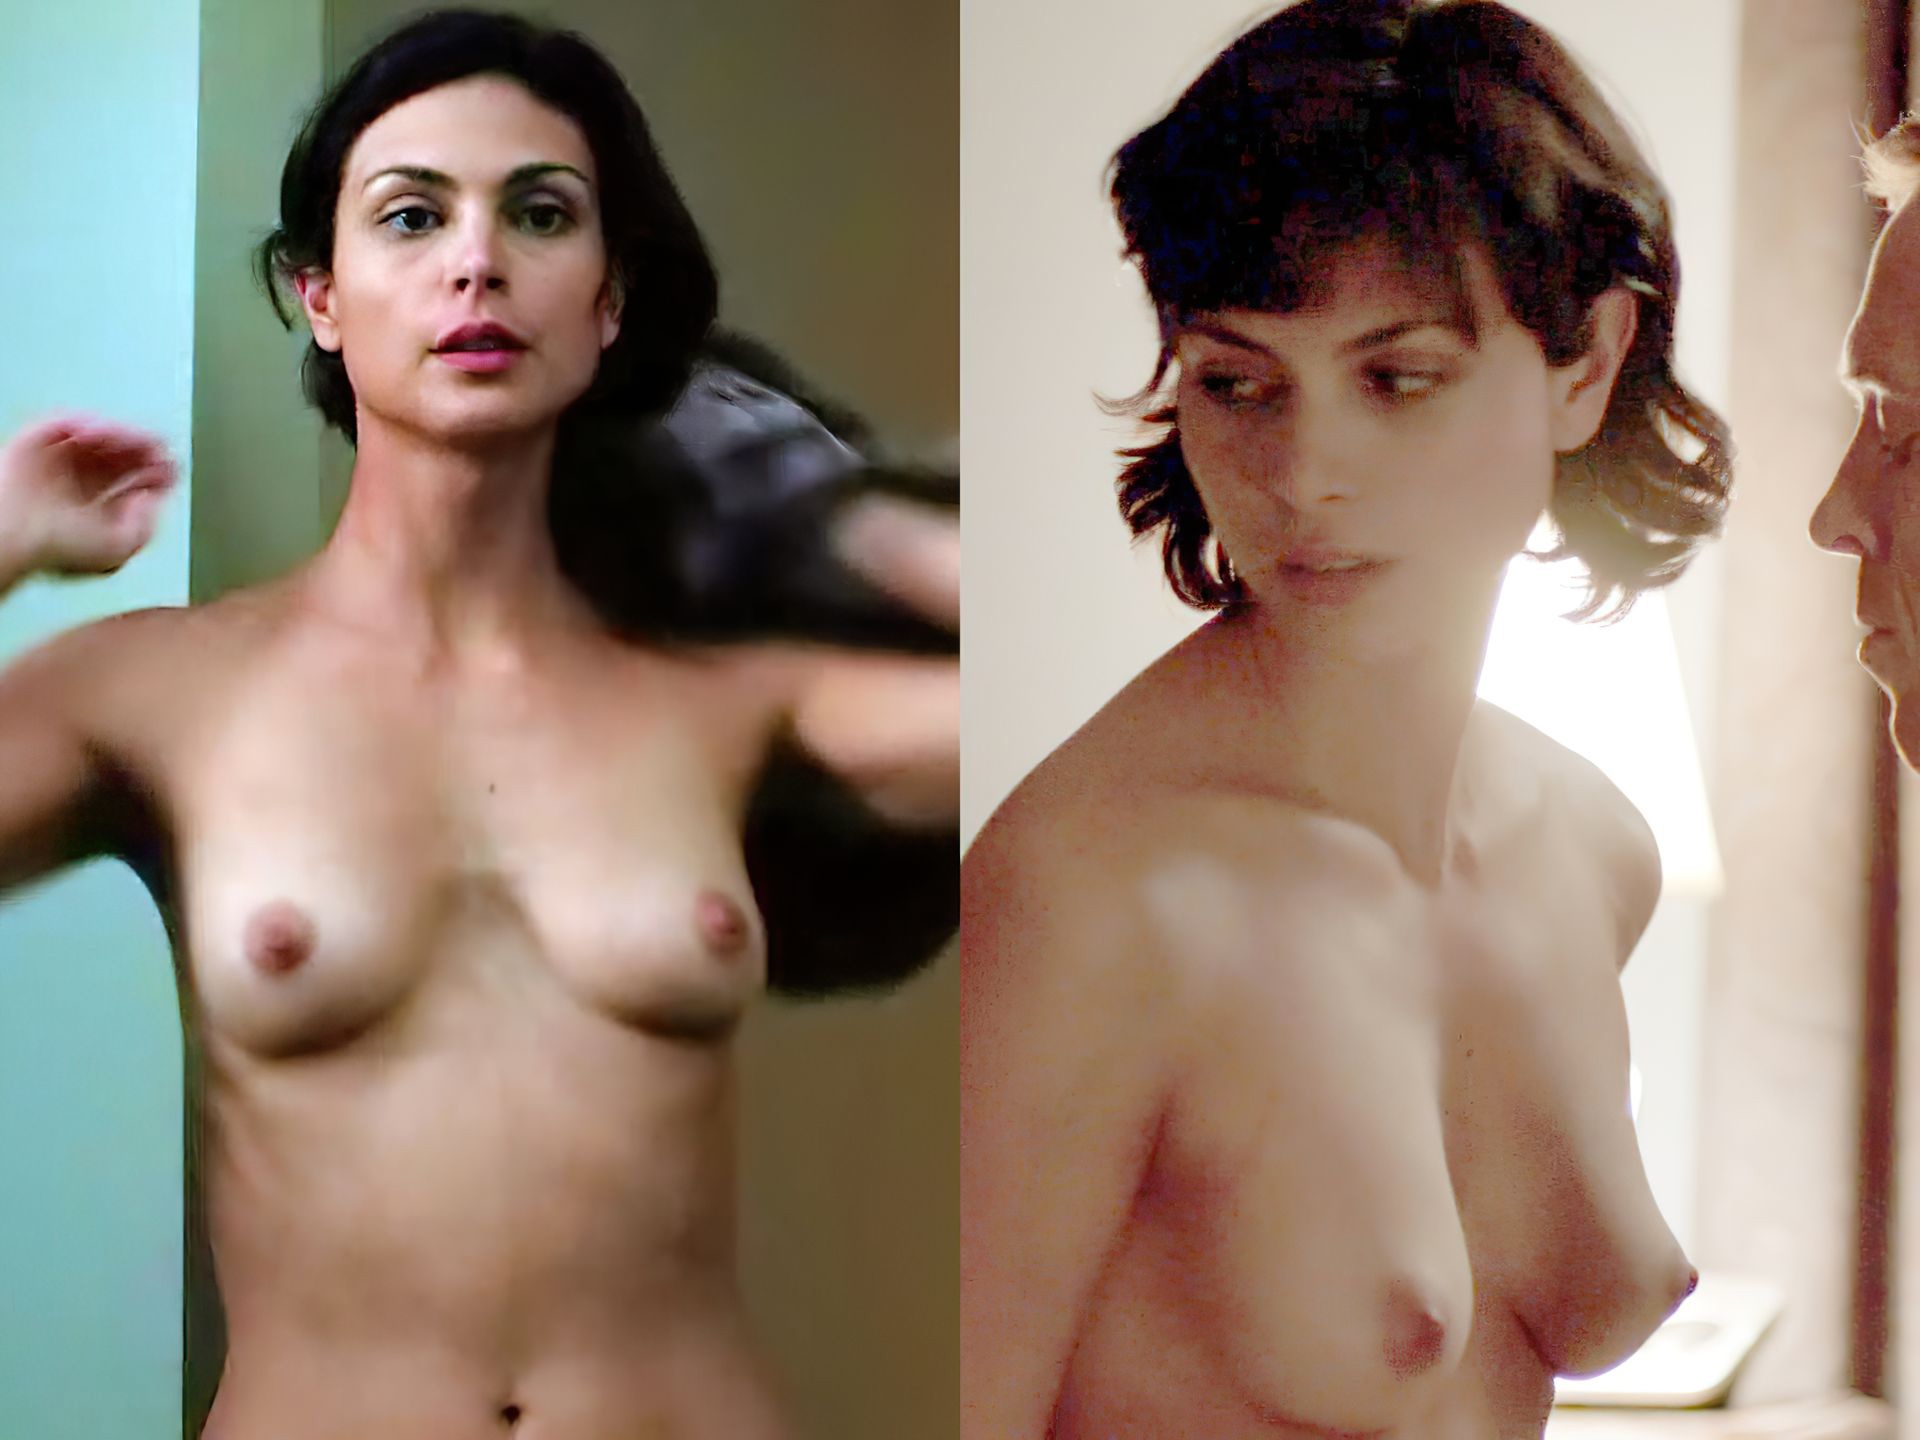 Morena baccarin nude pictures